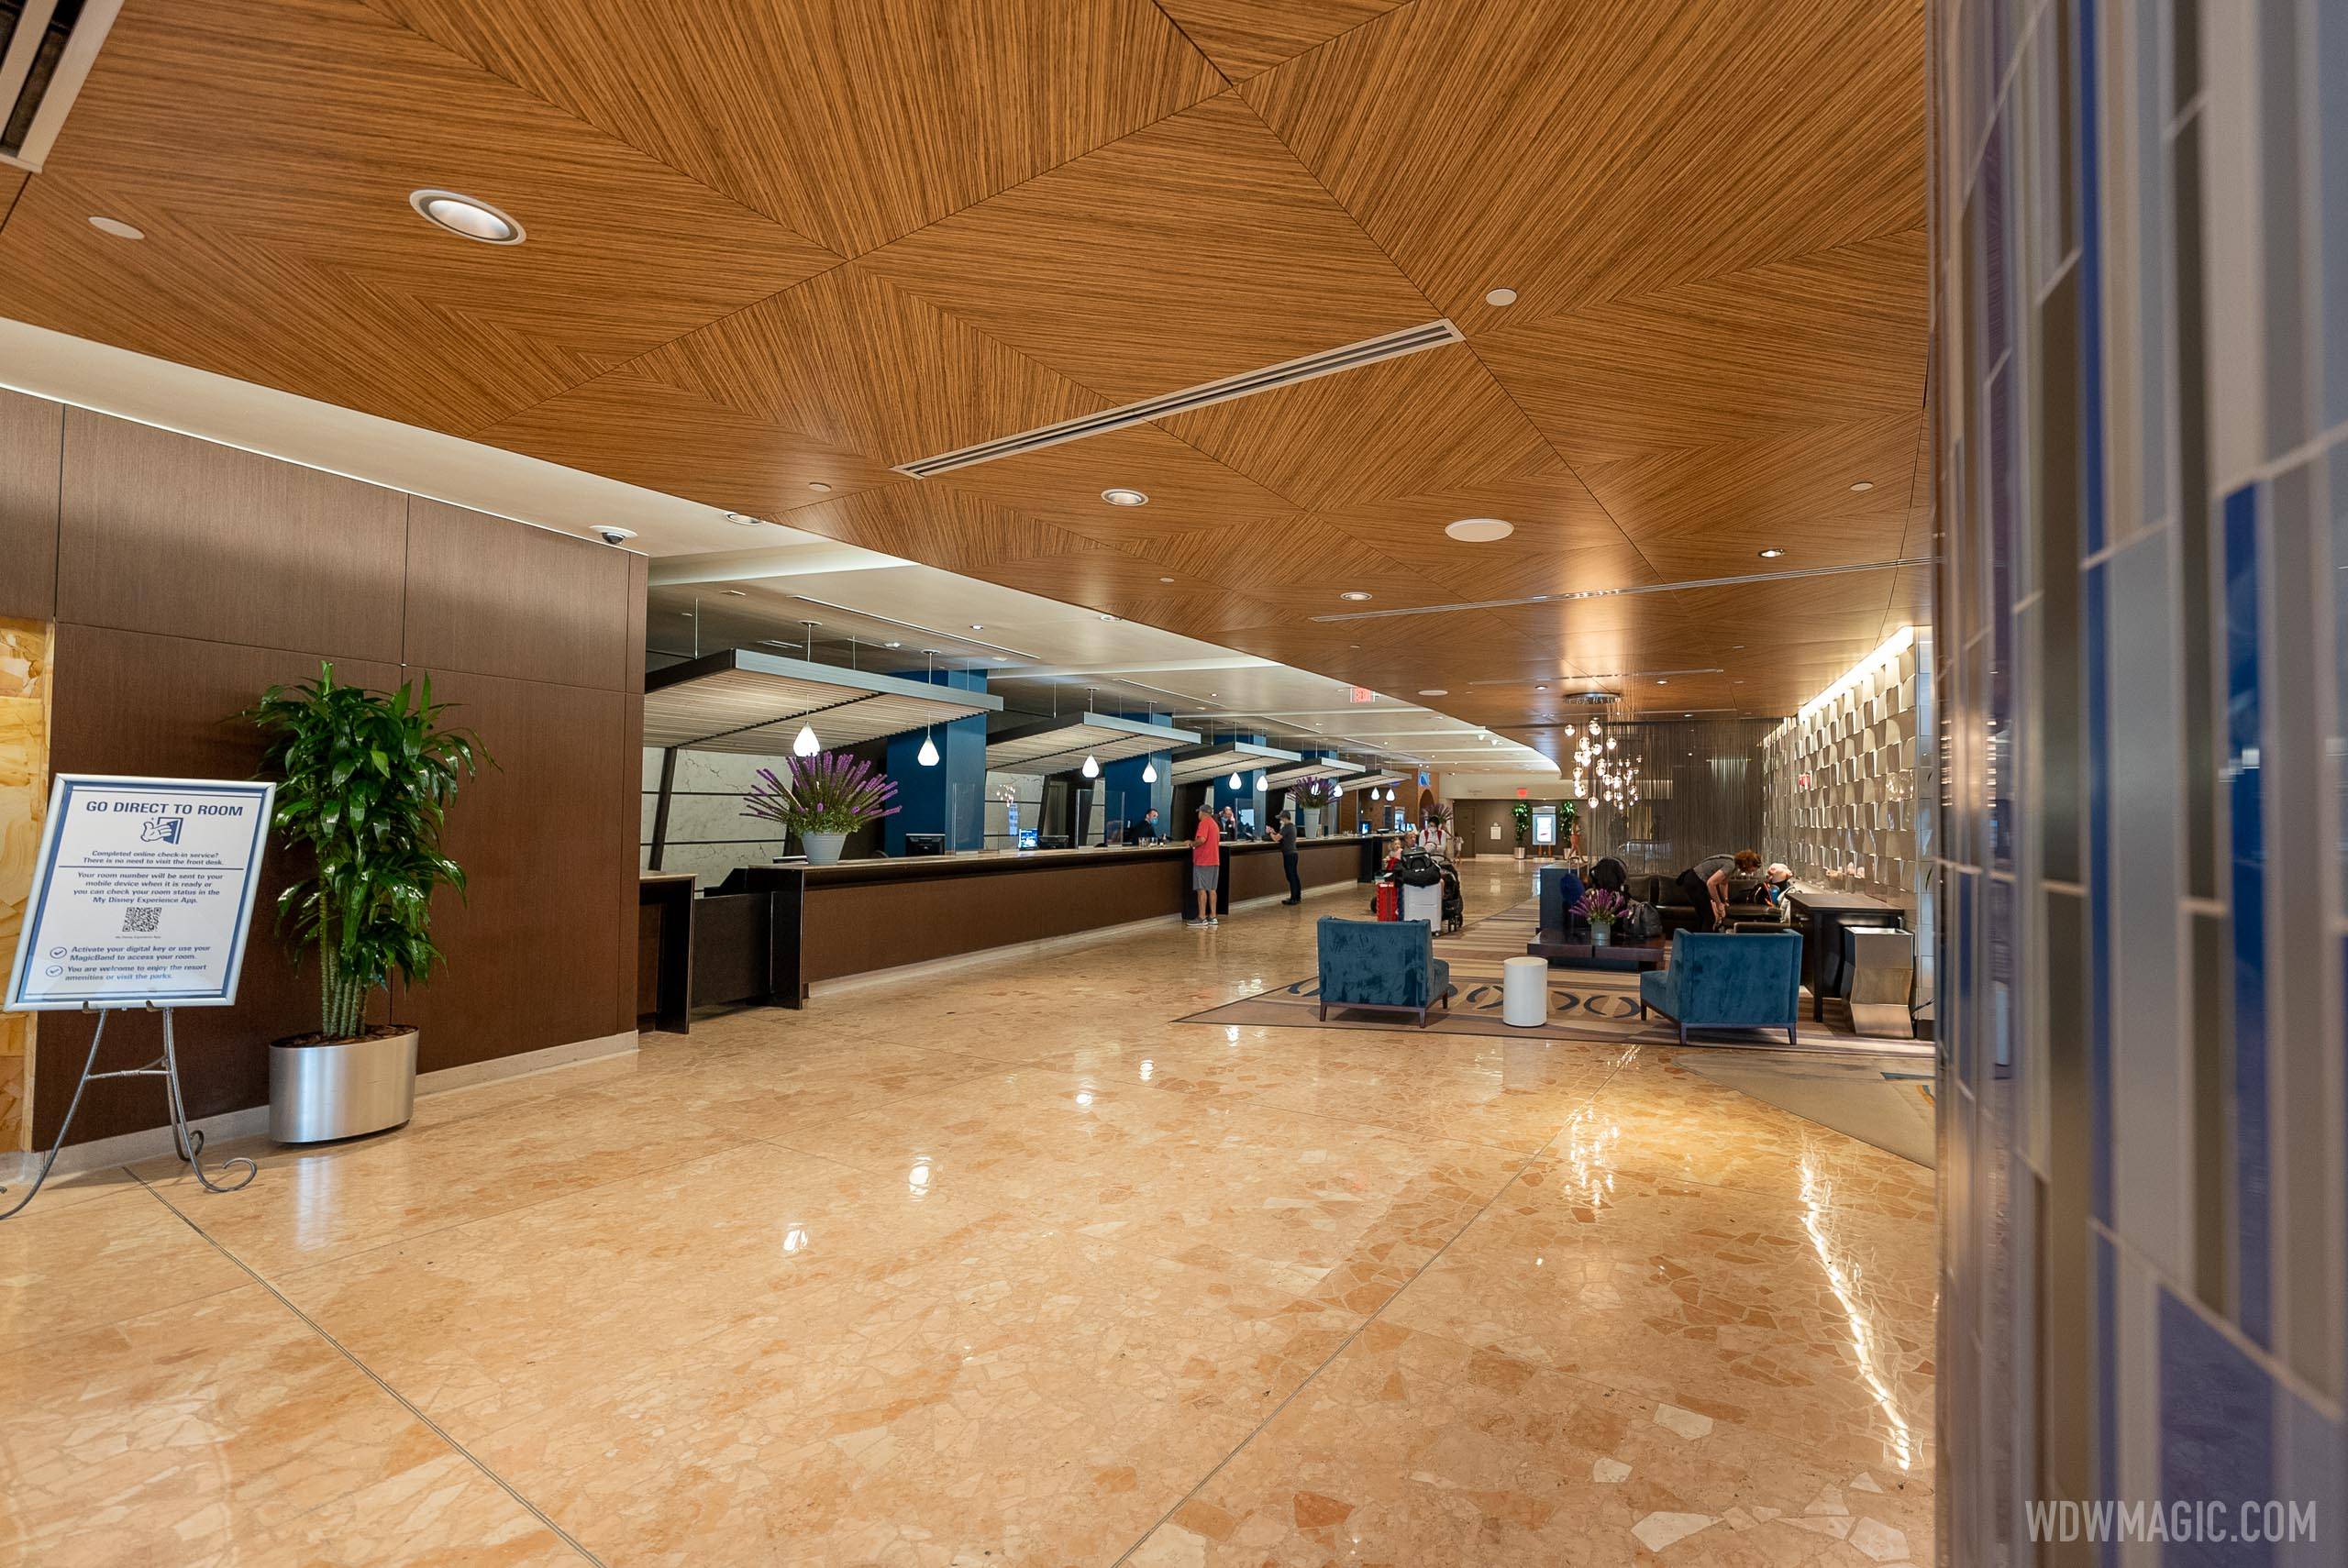 Contemporary Resort lobby overview- July 2021